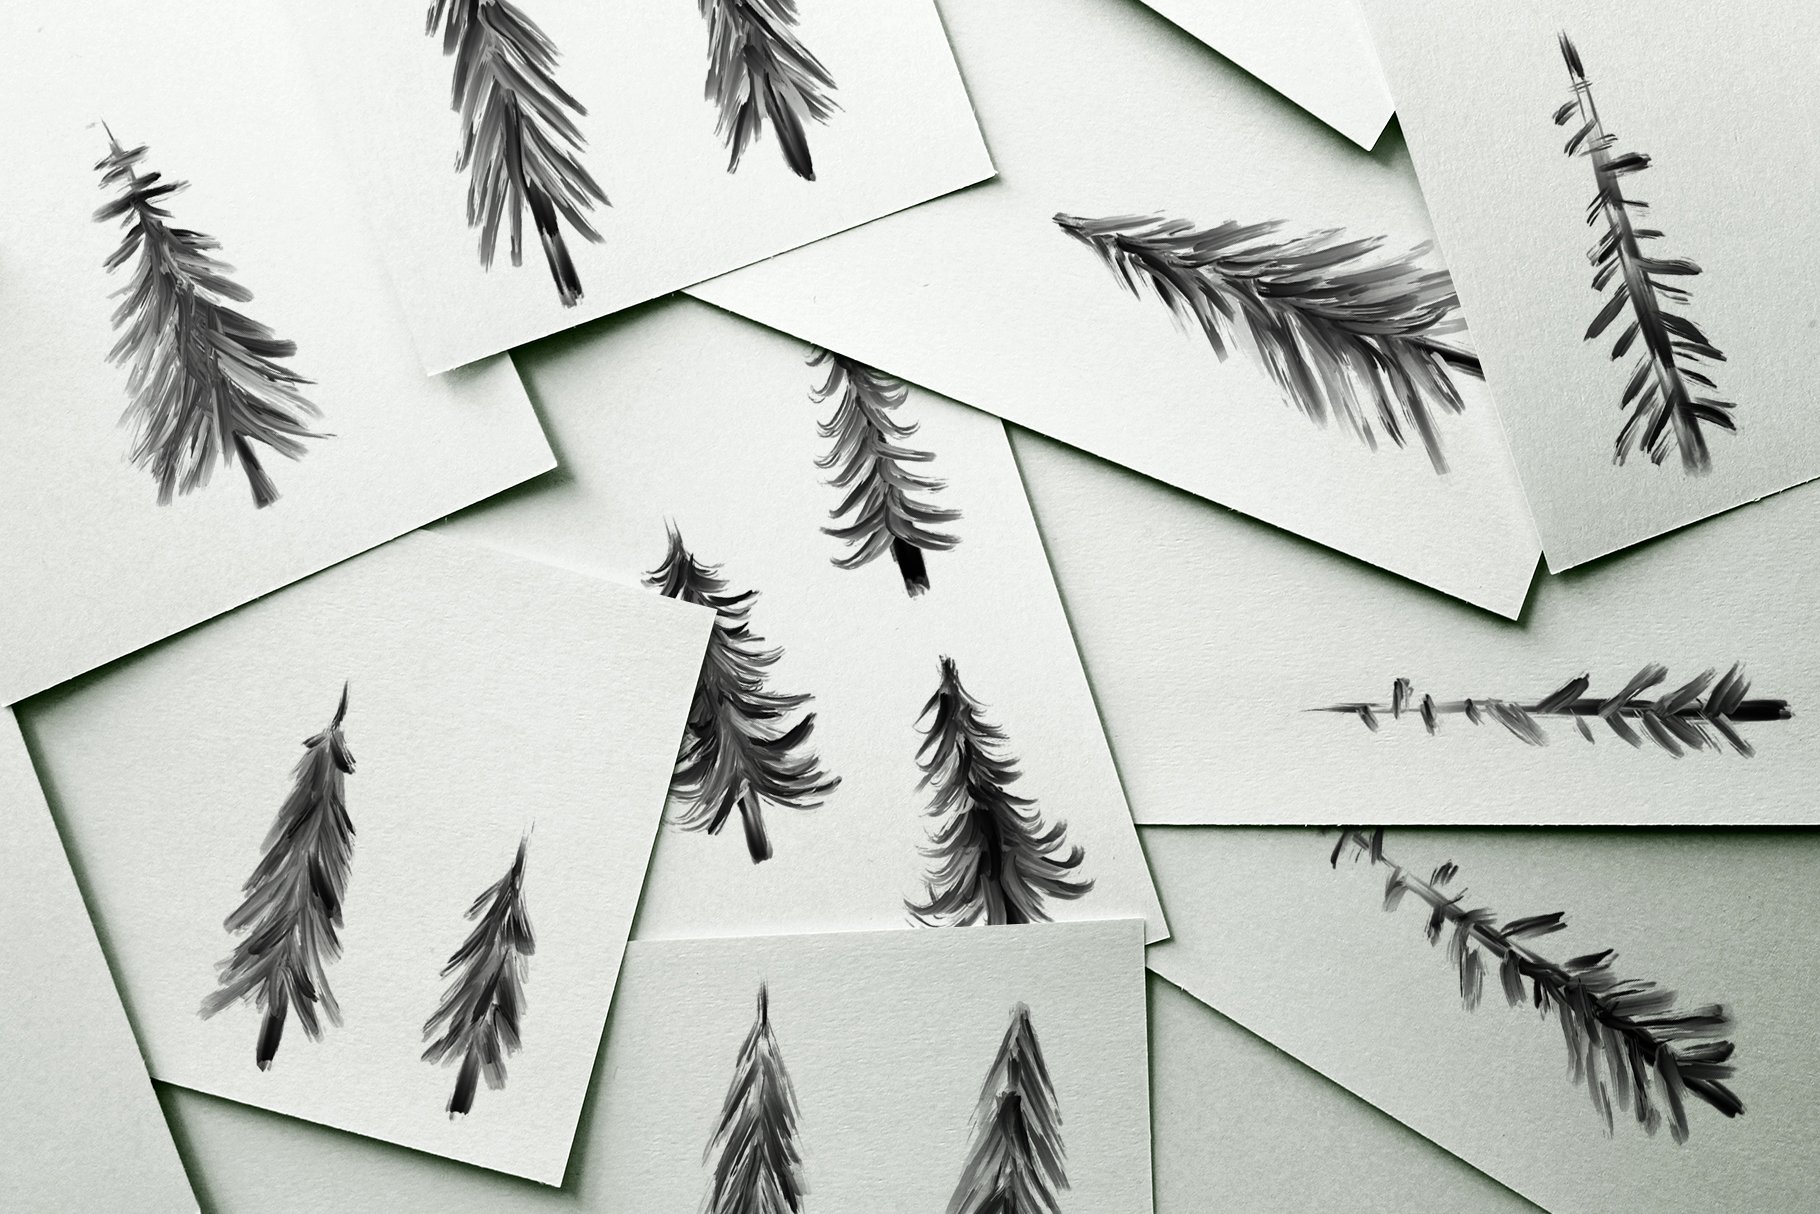 Bunch of cards with trees drawn on them.